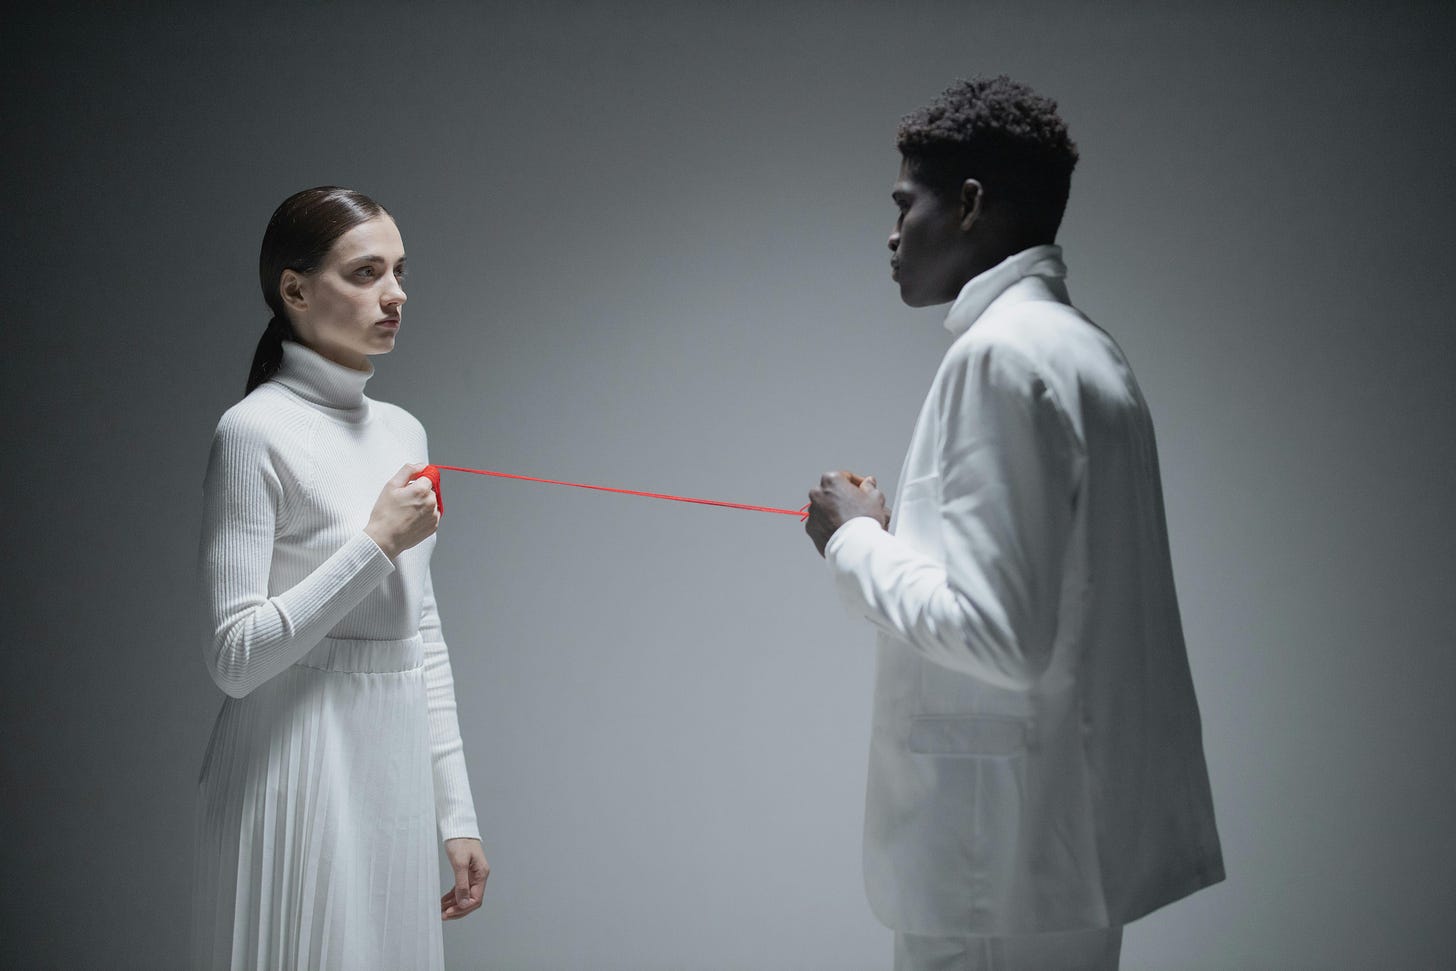 photo of white woman and black man wearing white clothes holding a red string between them while facing each other without smiling.